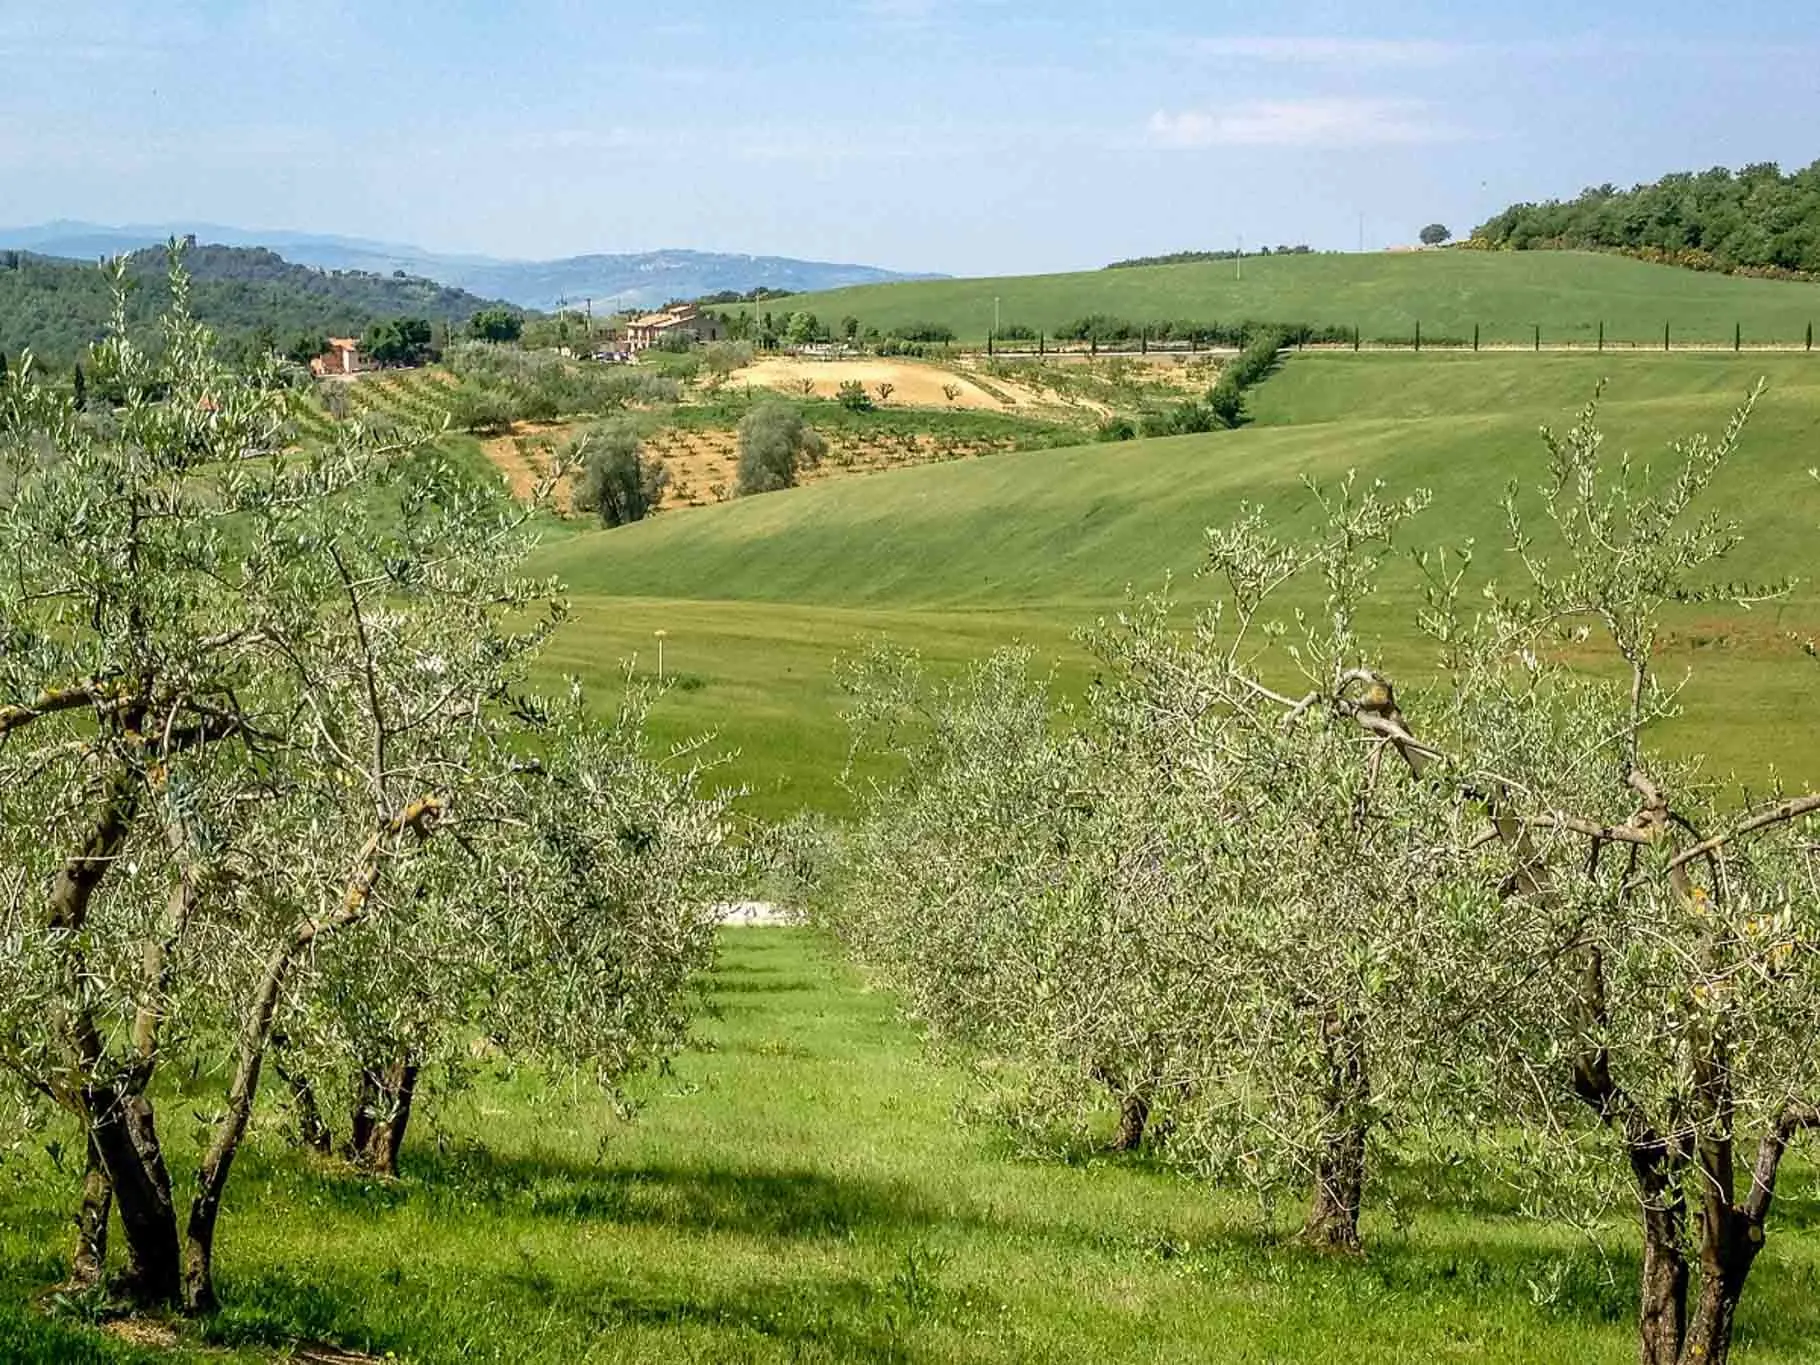 Olive trees on the hills of Tuscany